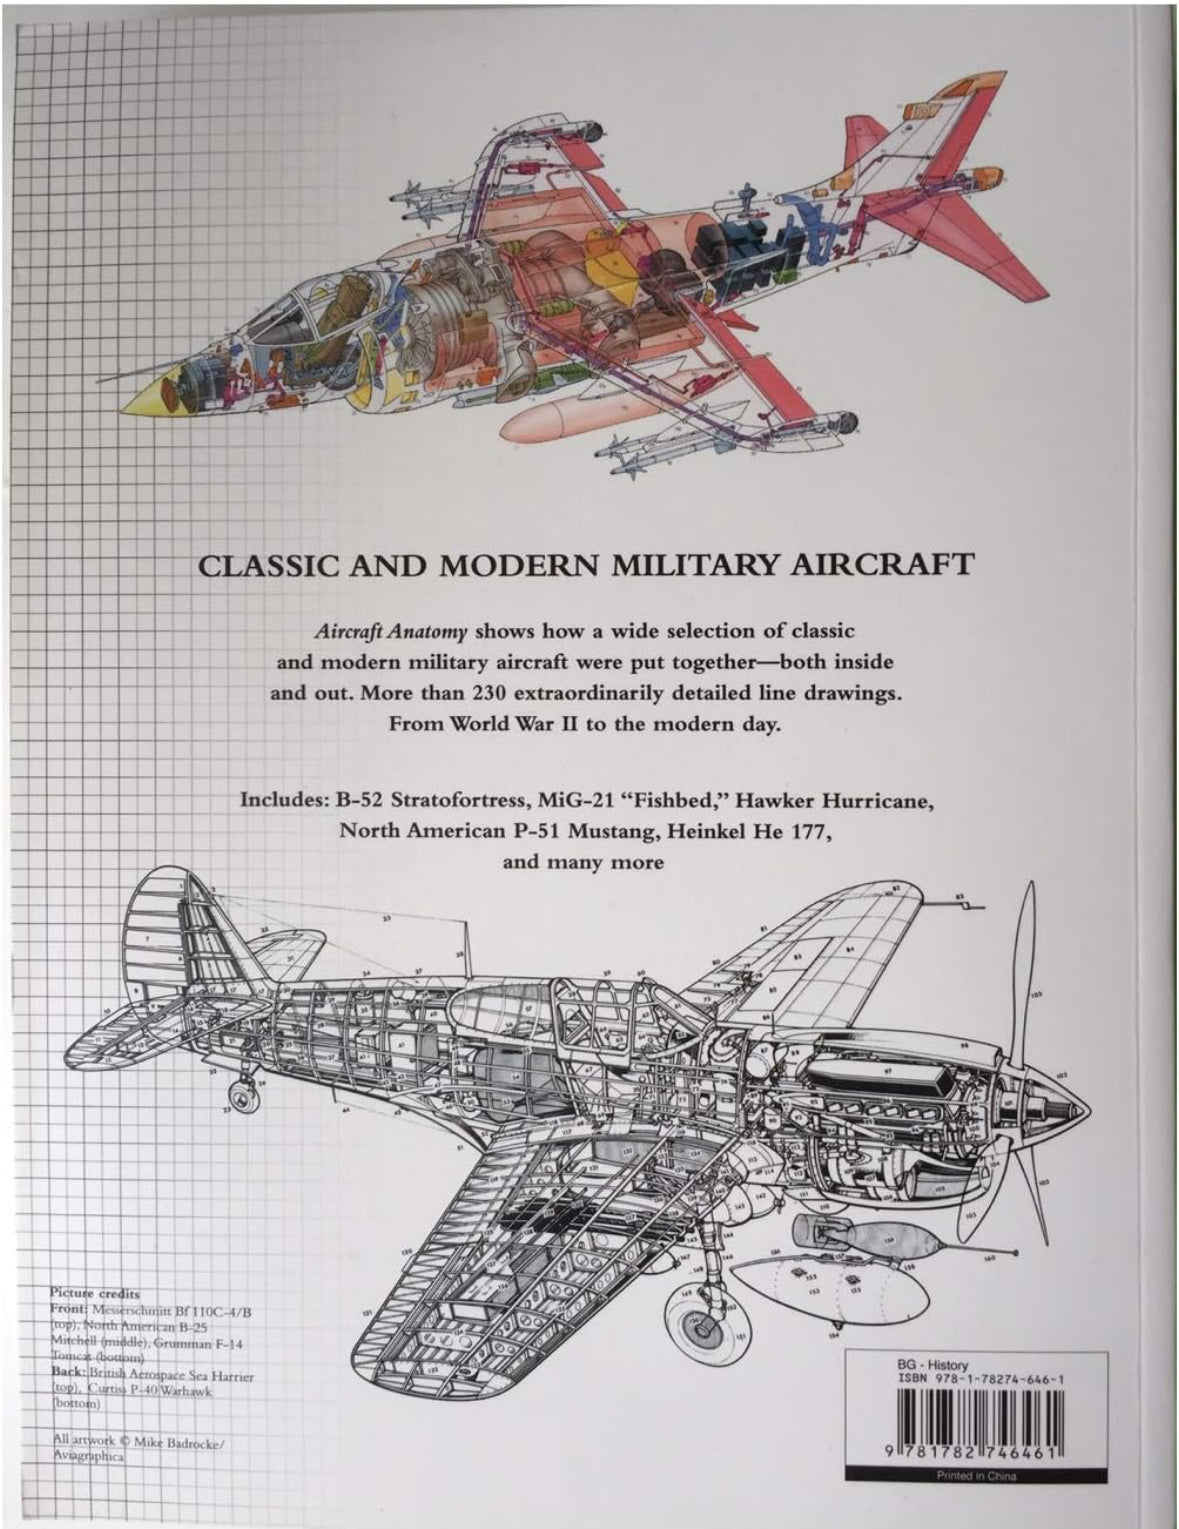 Aircraft Anatomy: A Technical Guide to Military Aircraft From World War II to the Modern Day by Soph Eden, Paul E; Moeng